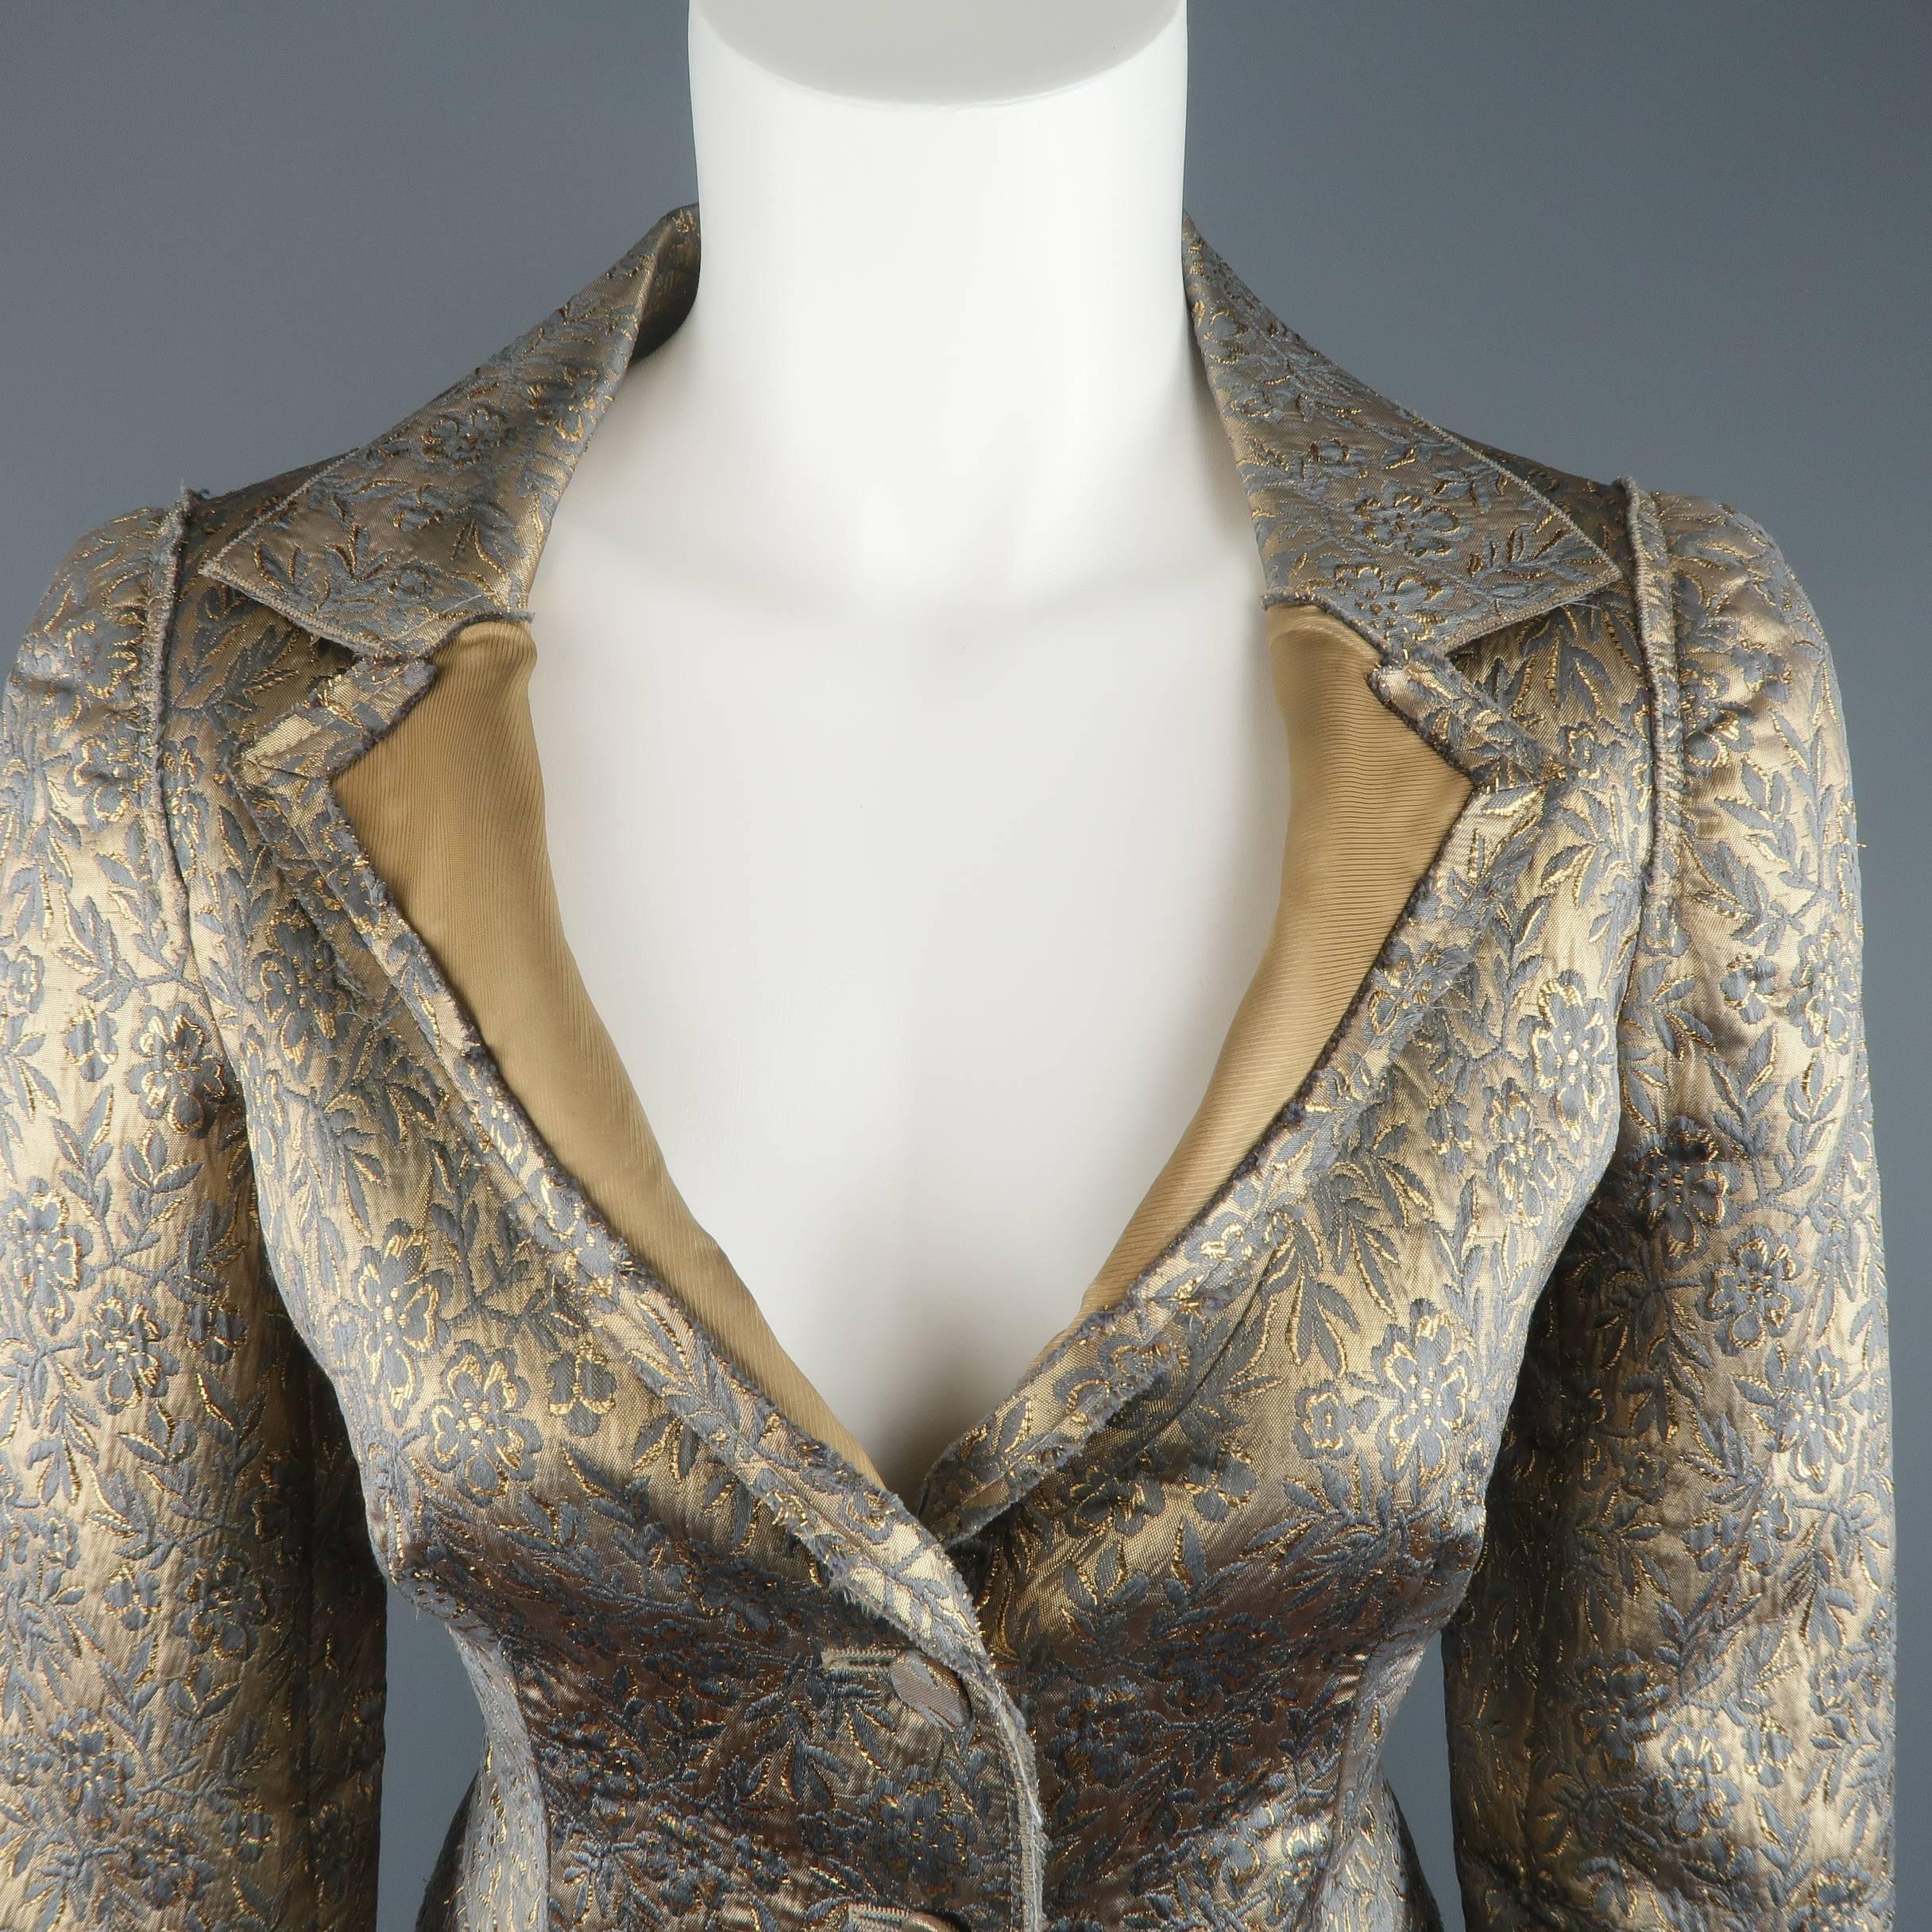 PRADA deconstructed sport coat jacket comes in a metallic gold silk blend floral print brocade material and features a spread notch lapel with extended golden beige liner, raw edge frayed piping throughout, two button closure, and pleated peplum